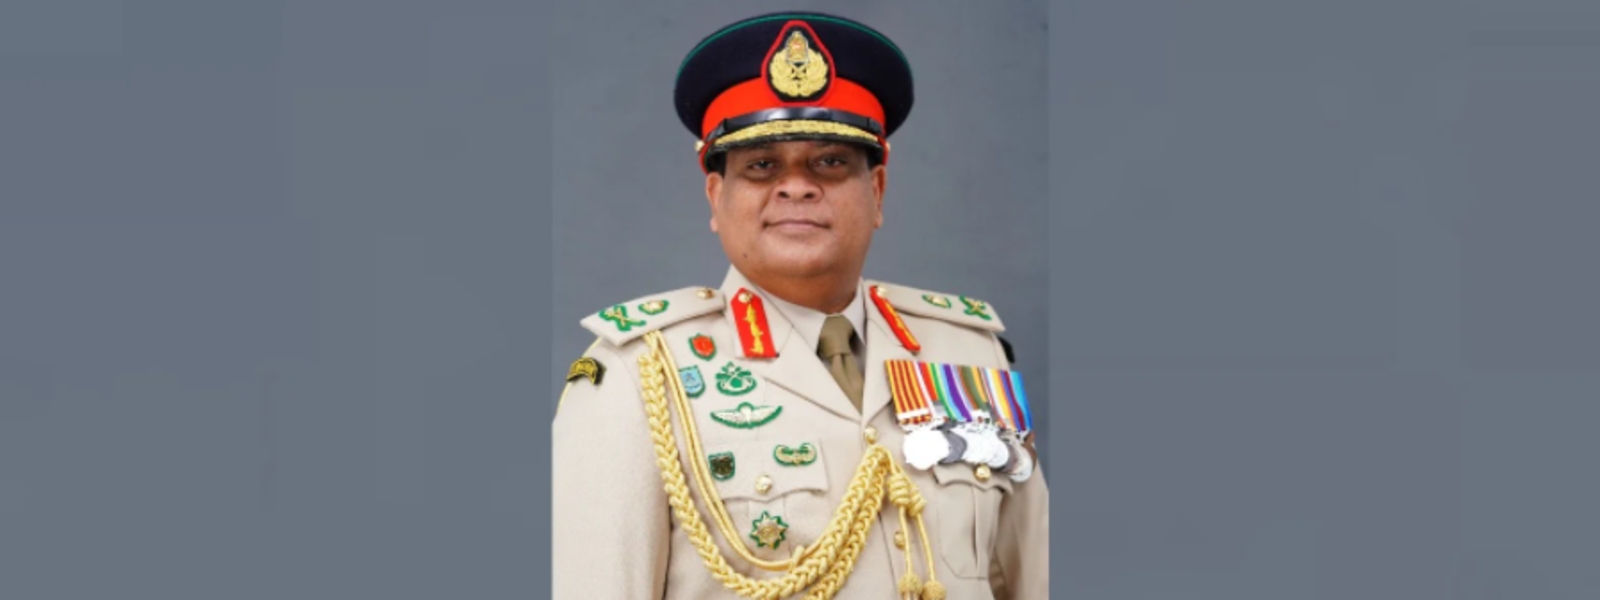 ARMY COMMANDER PROMOTED TO RANK OF 04 STAR GENERAL